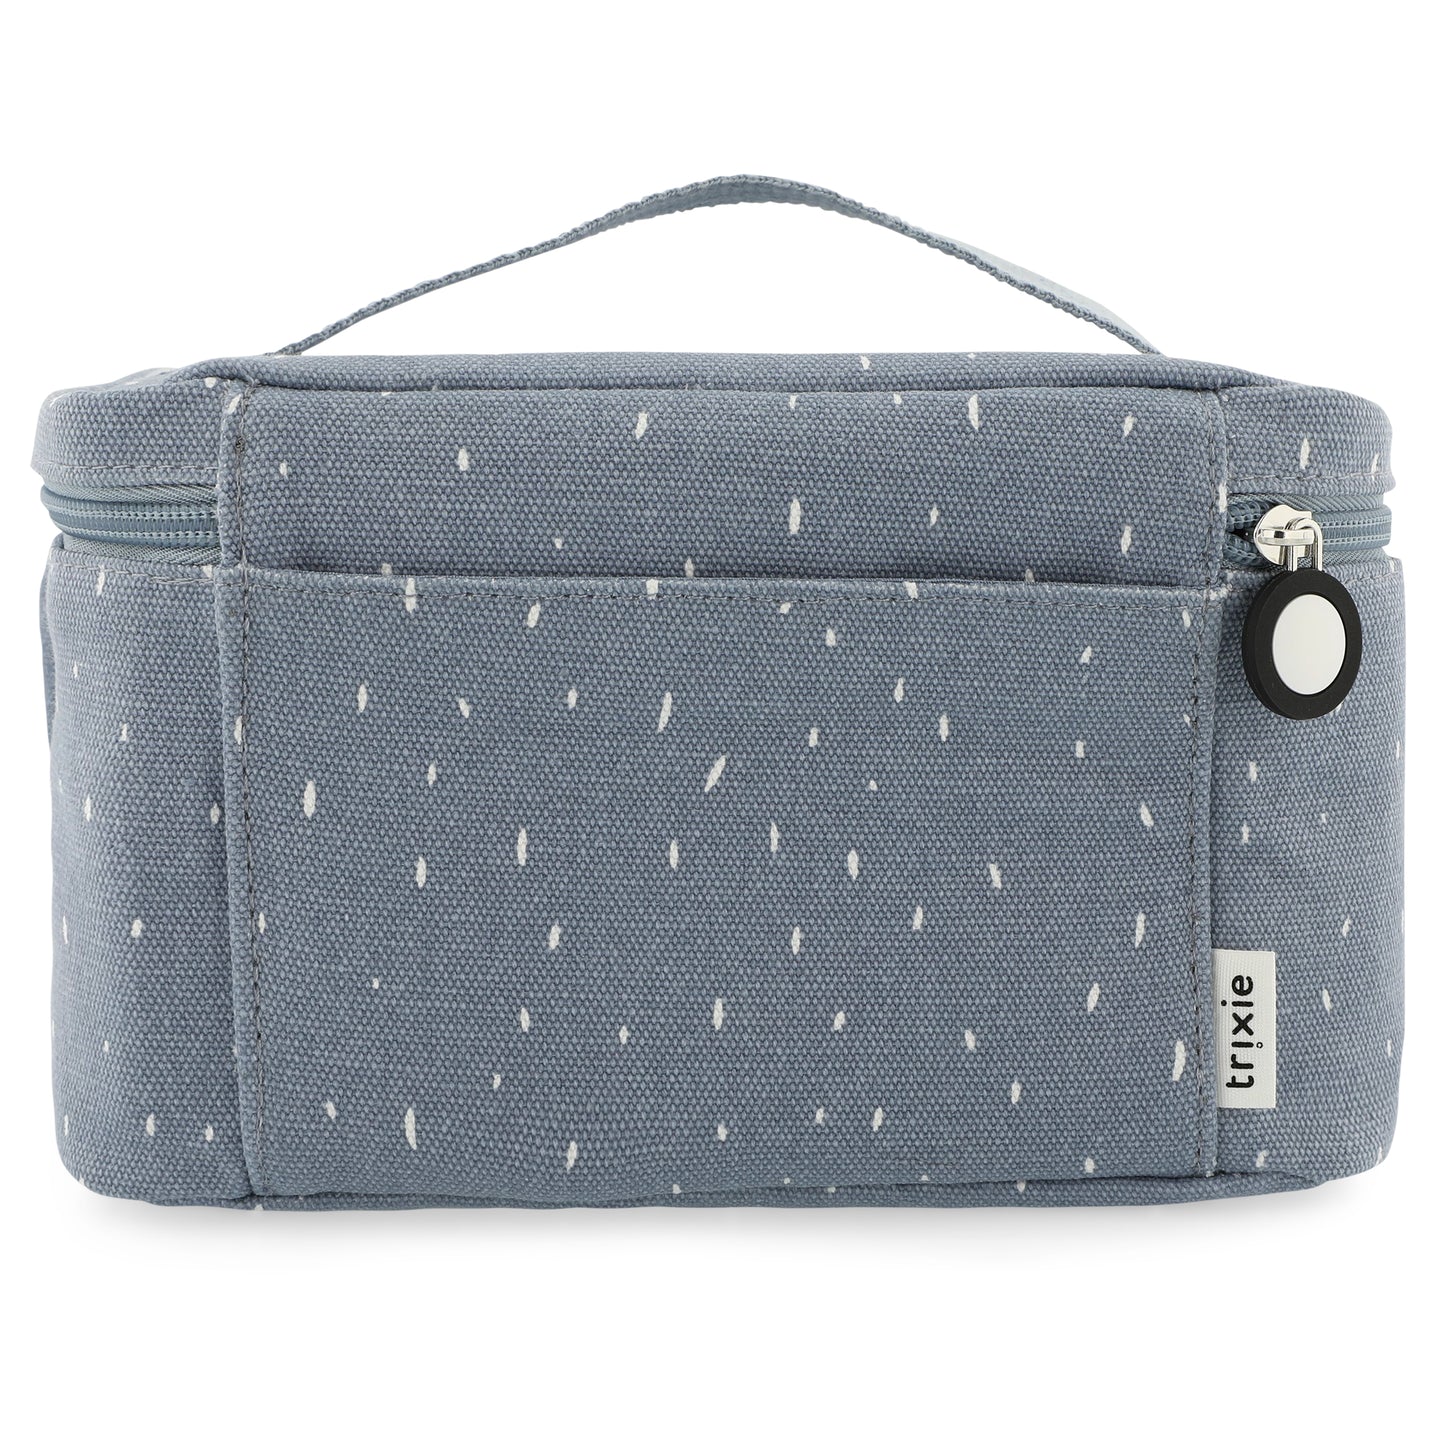 Trixie - Thermal lunch bag - Mrs. Elephant